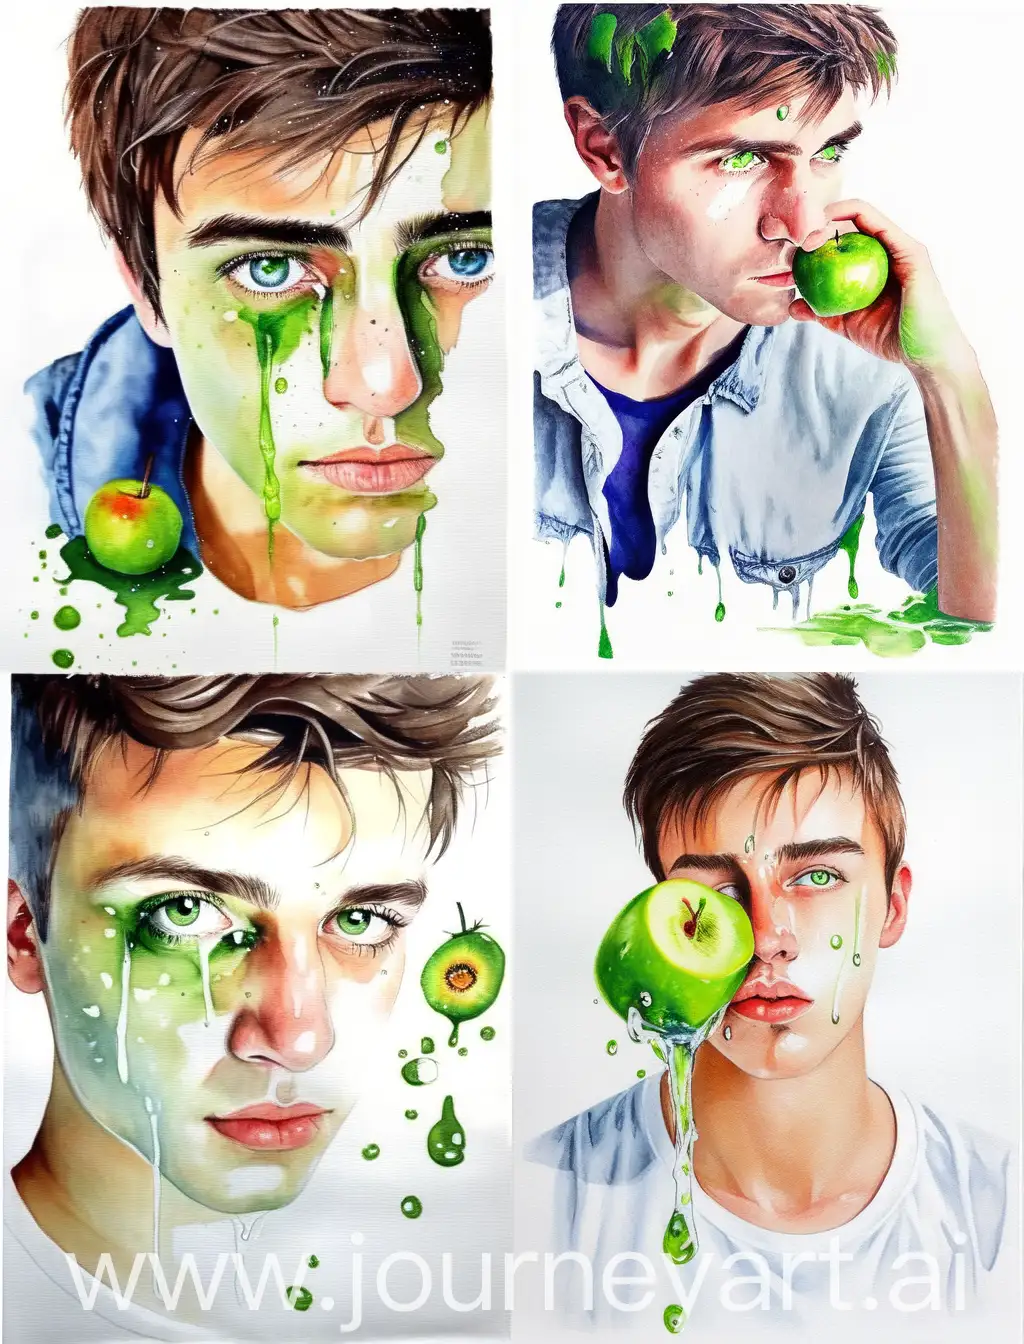 Watercolor technique - white background - portrait of attractive young man, 17 years old - beautiful face - very beautiful eyes with very detailed details - he is holding a green apple to his lips as if he is about to bite the apple - drops of water can be seen on his face - drops Water can be seen on the apple - very beautiful